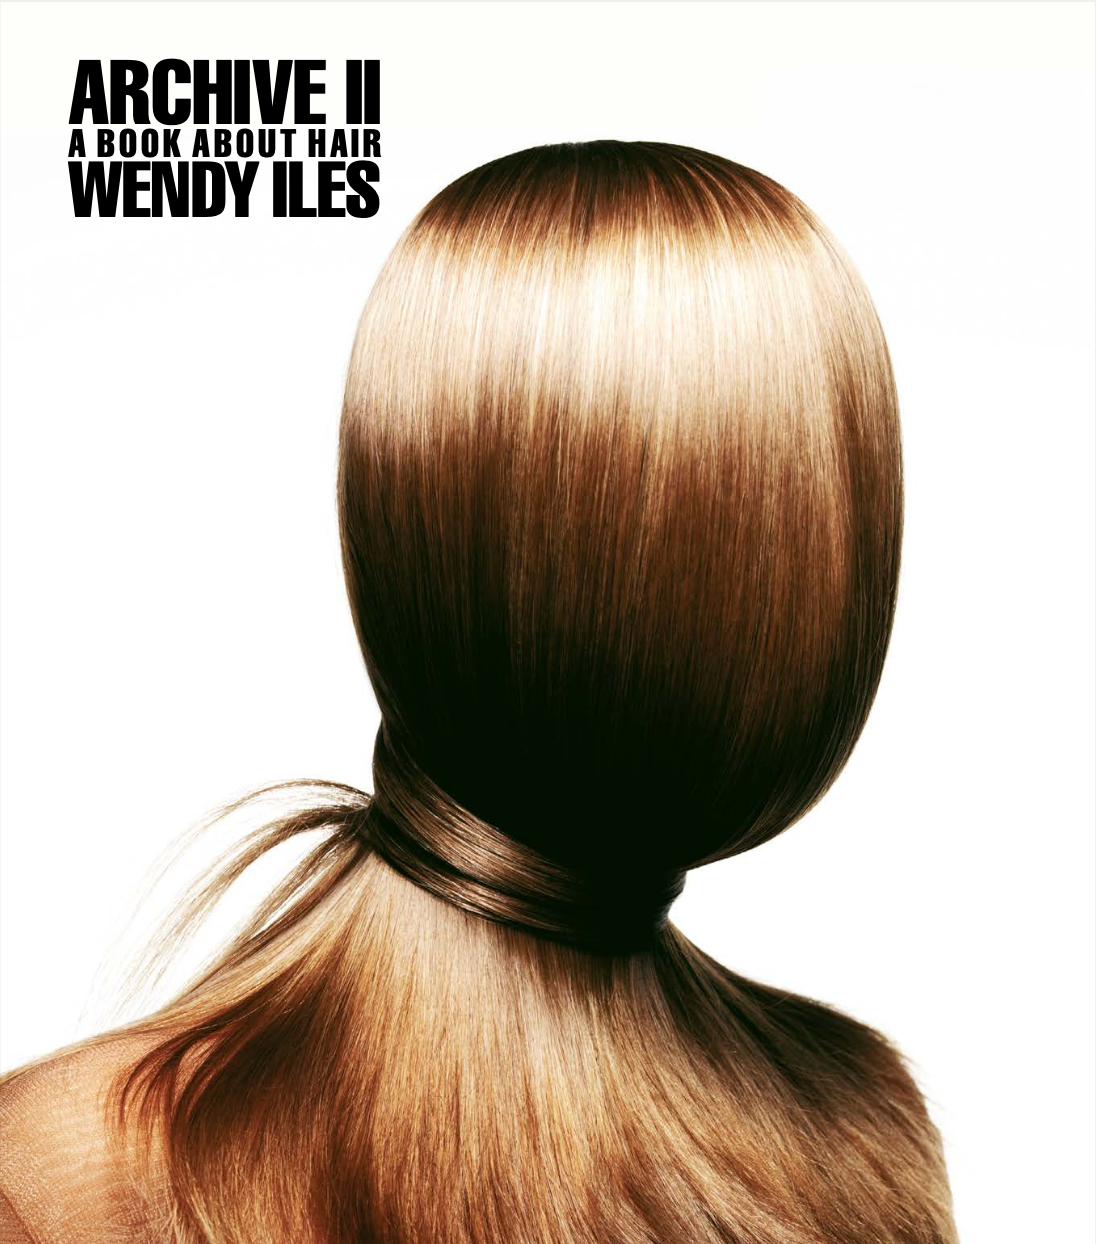 ARCHIVE II – A BOOK ABOUT HAIR BY WENDY ILES